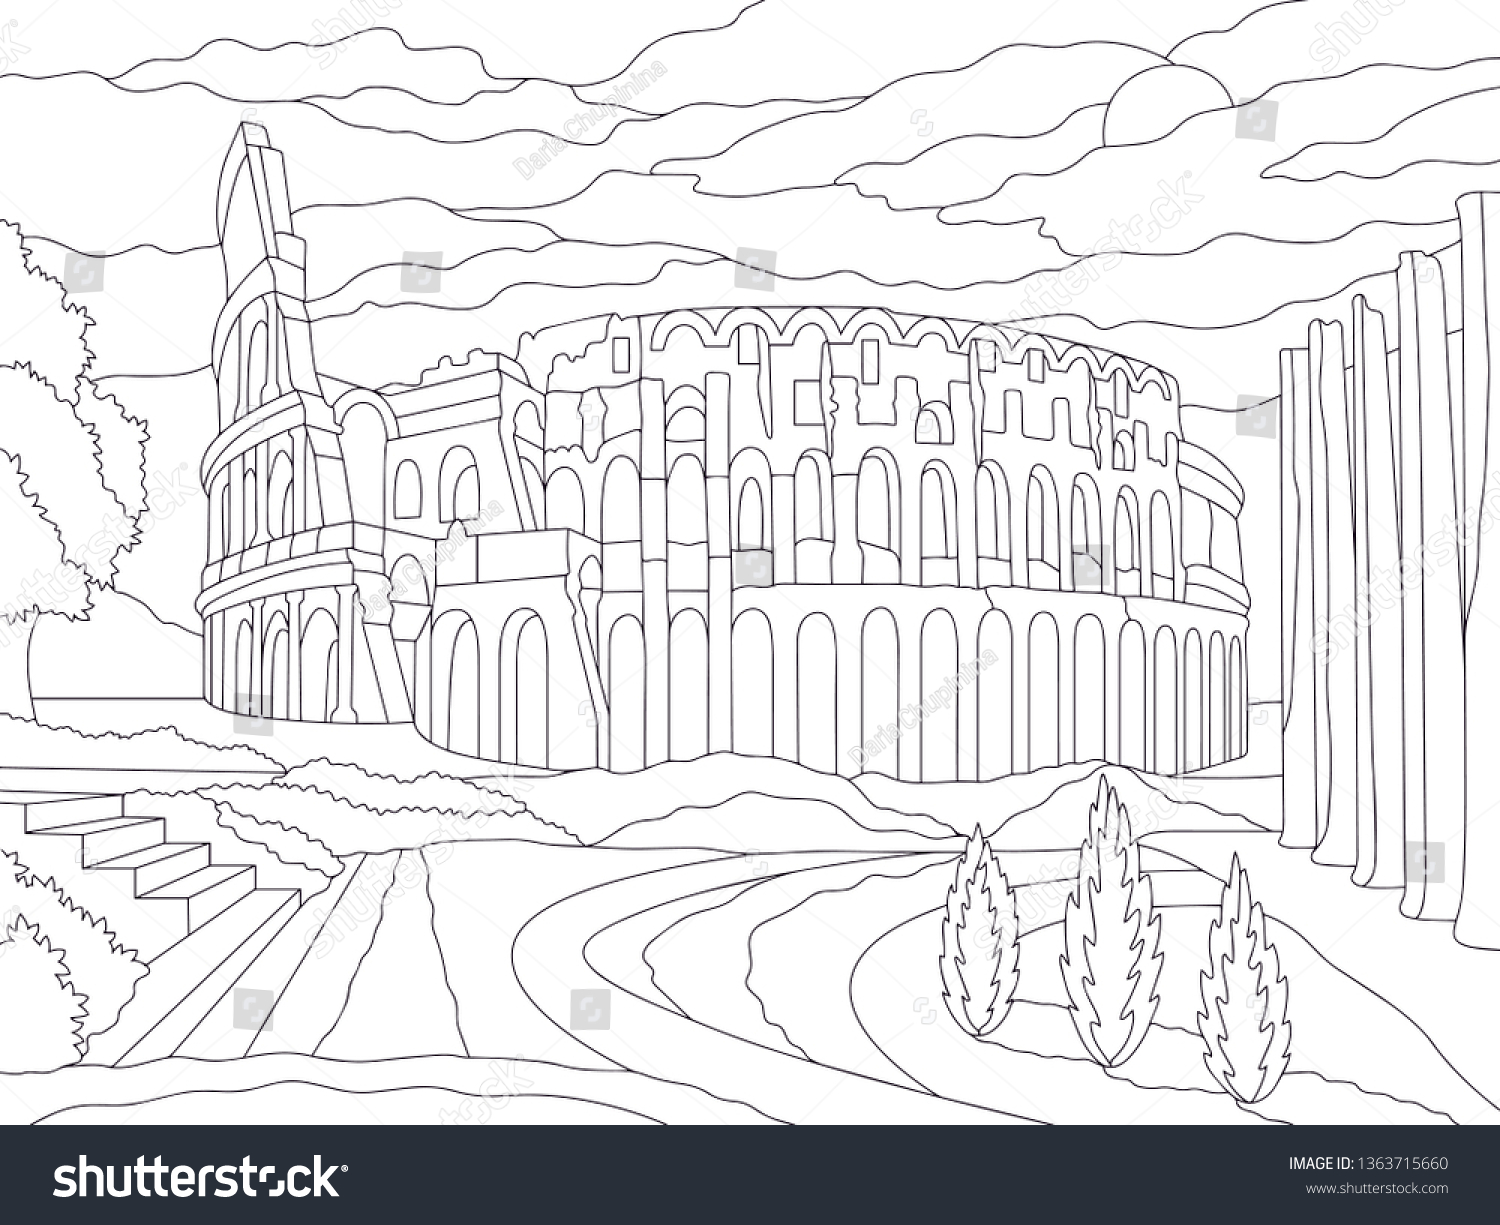 Rome coloring book isolated on white stock vector royalty free